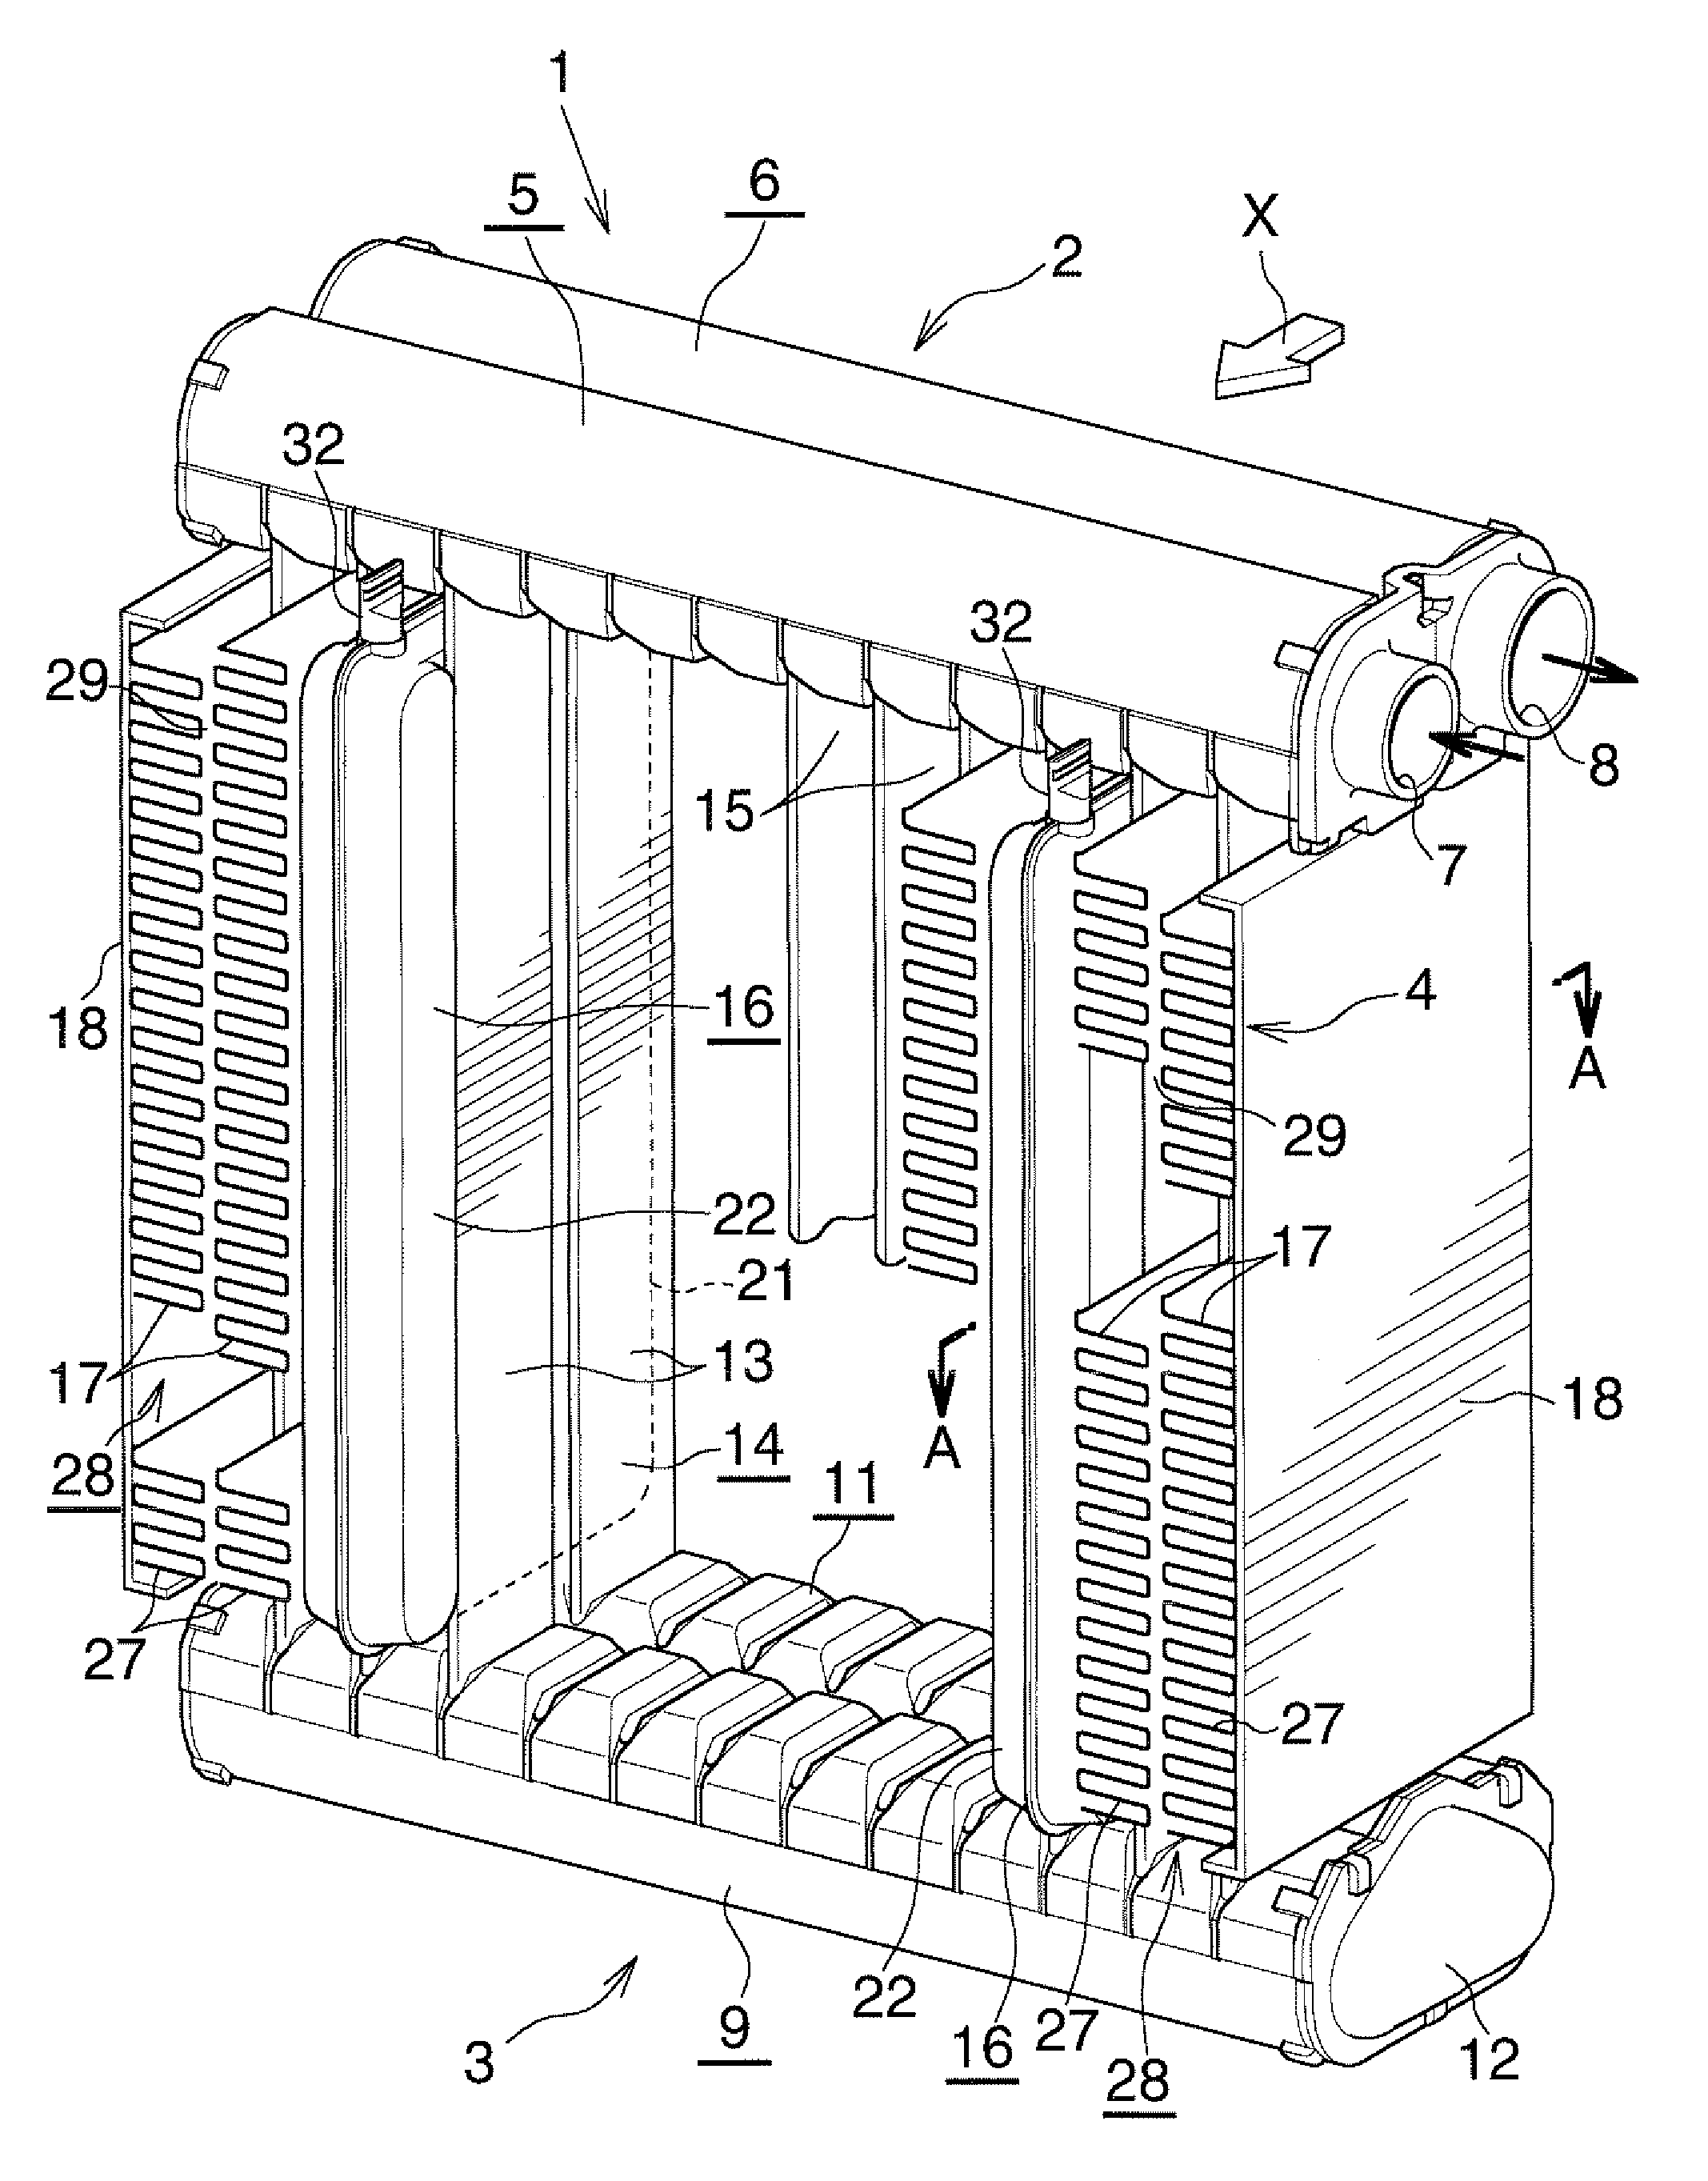 Heat exchanger with thermal storage function and method of manufacturing the same